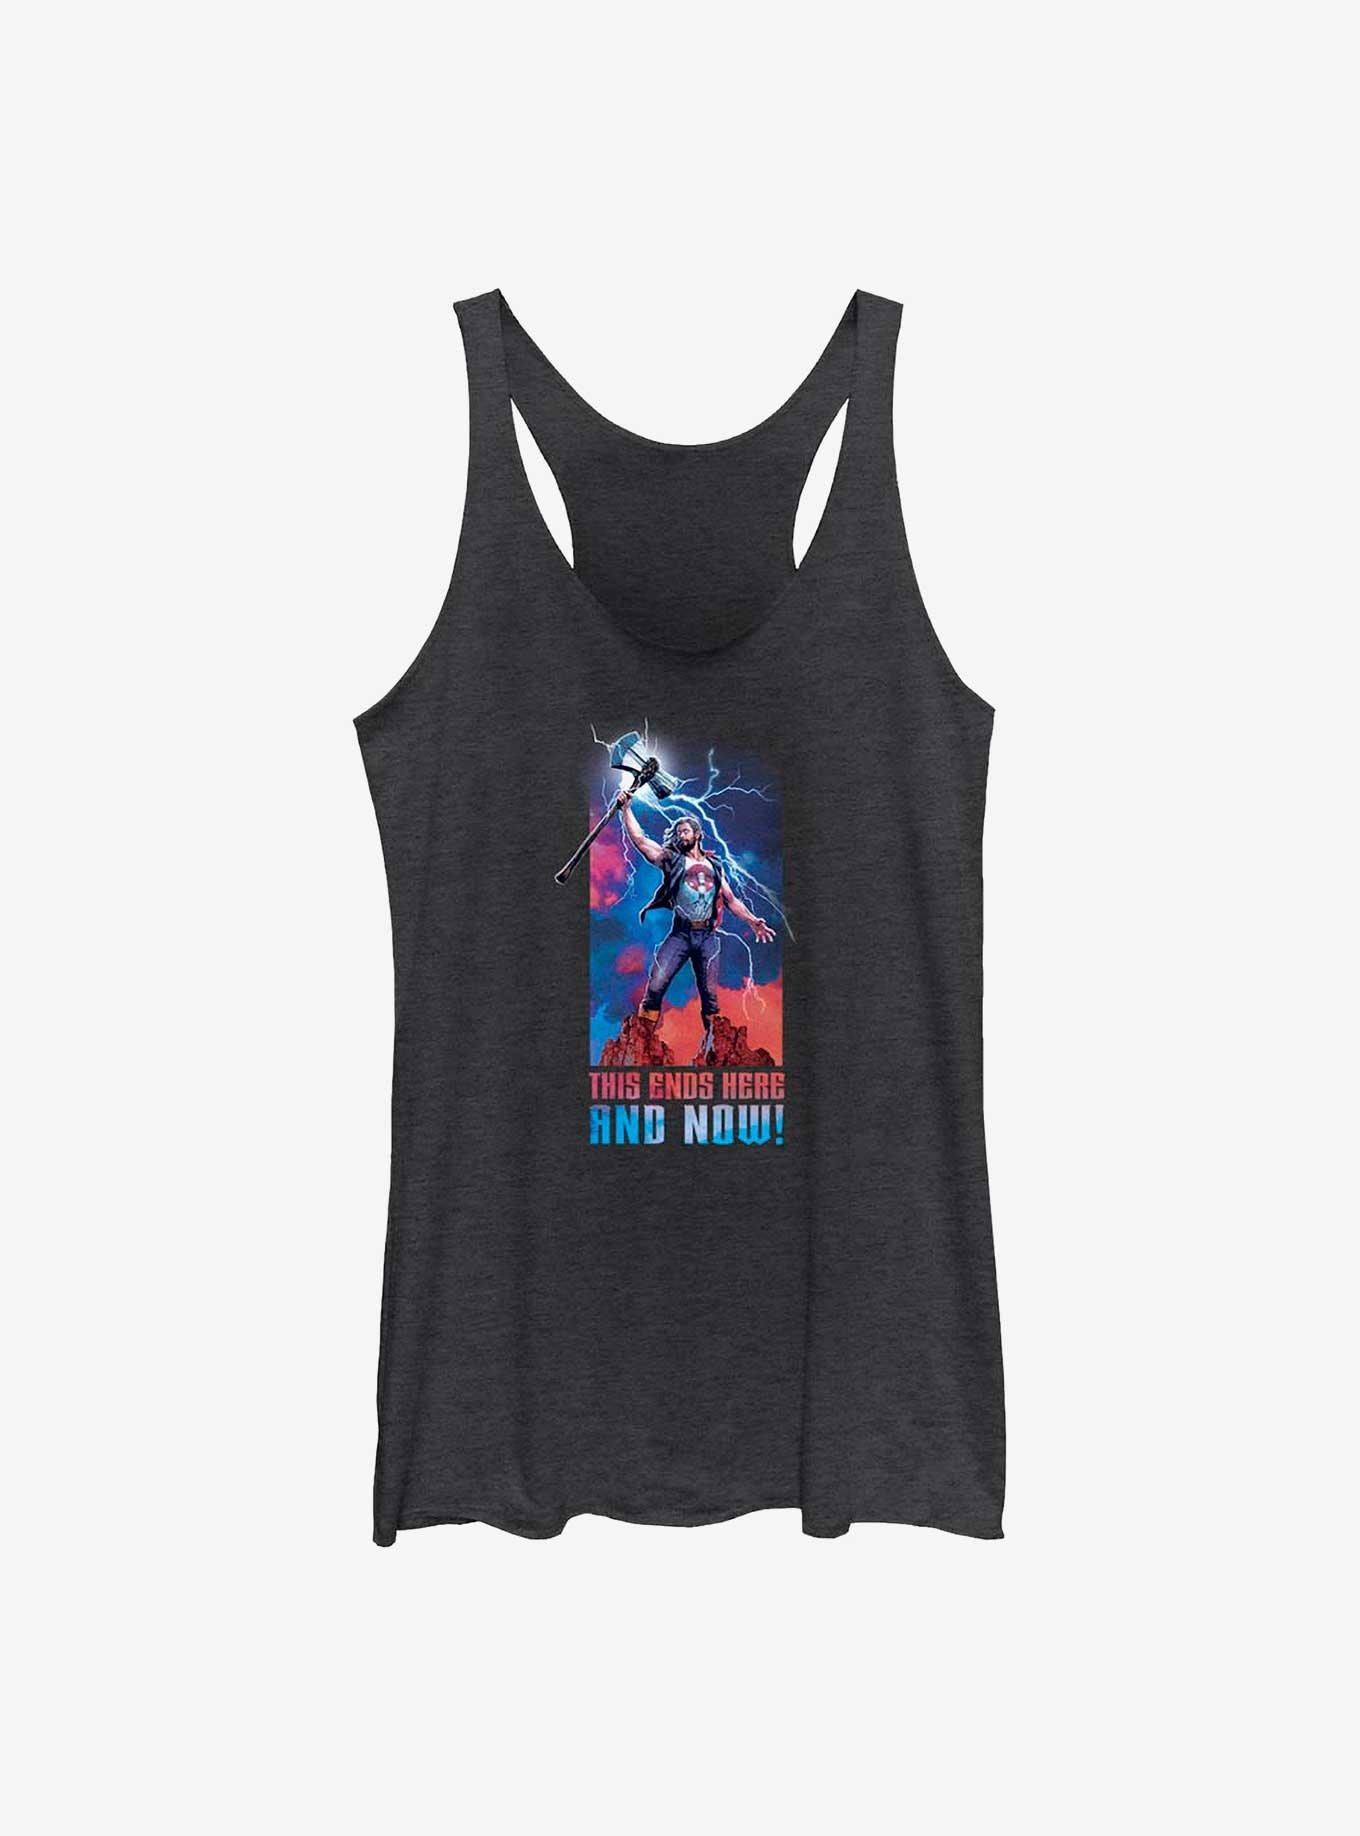 Marvel Thor: Love and Thunder Ends Here and Now Girls Tank, BLK HTR, hi-res